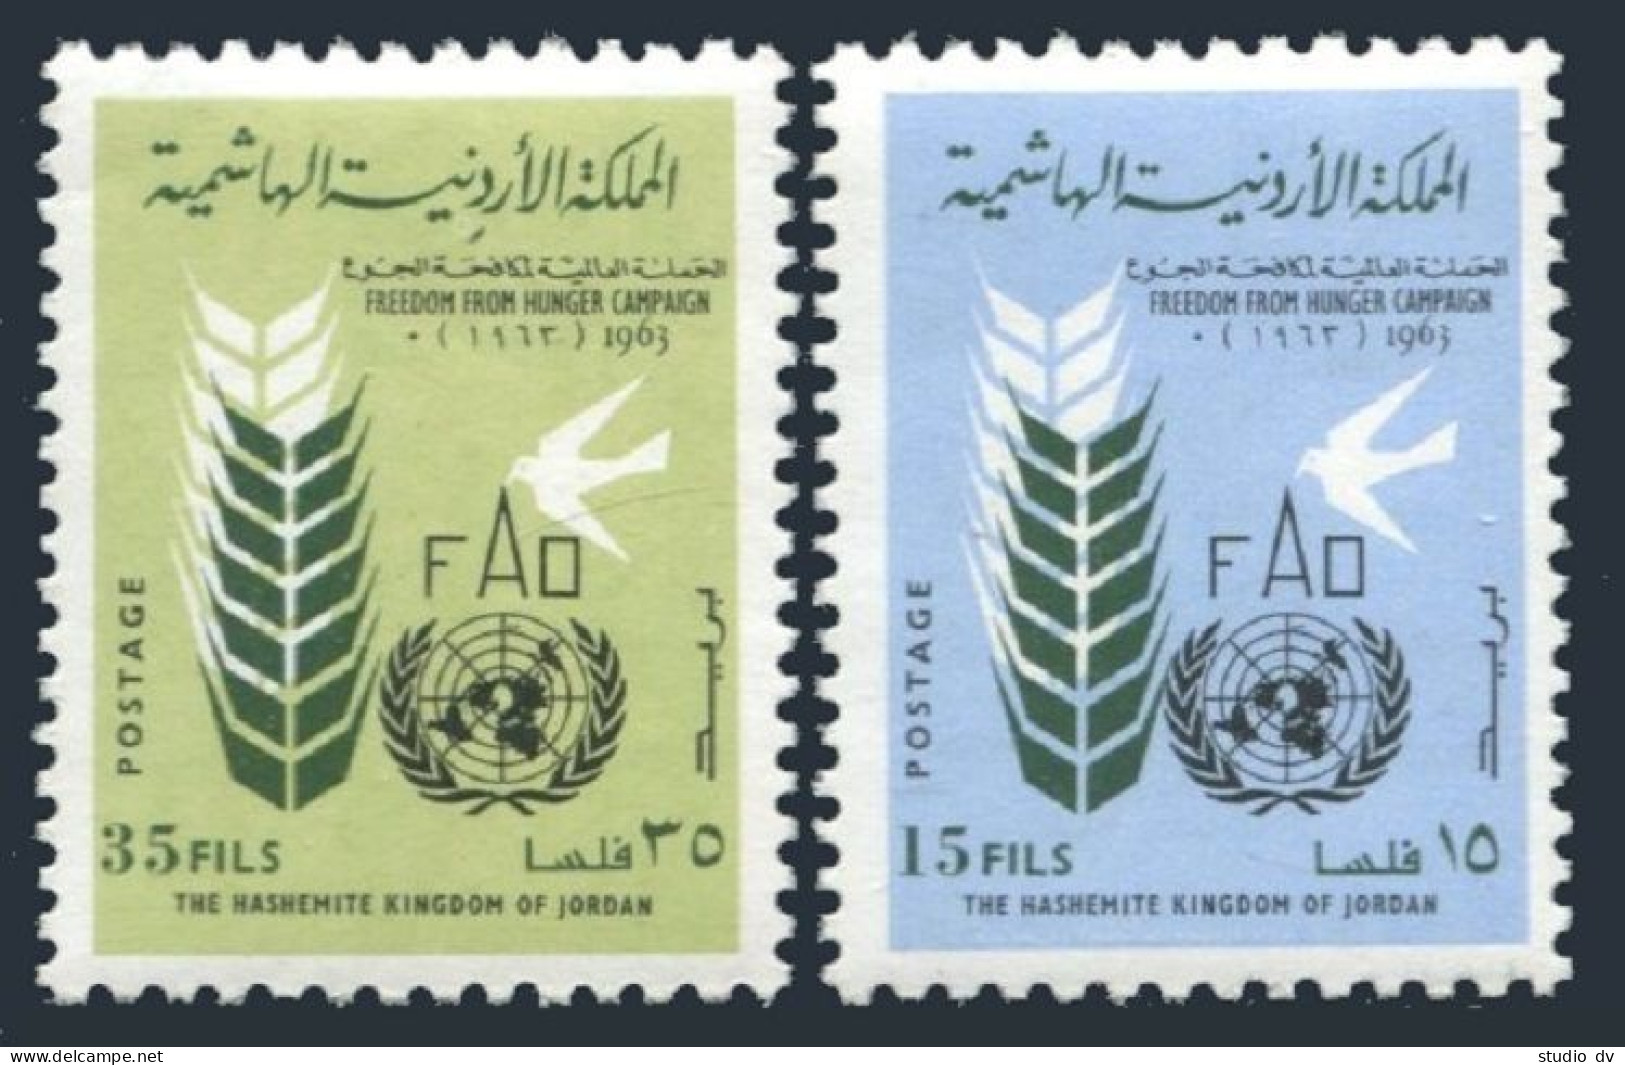 Jordan 398-399,399a & Imperf, MNH. FAO Freedom From Hunger Campaign 1963. - Jordania